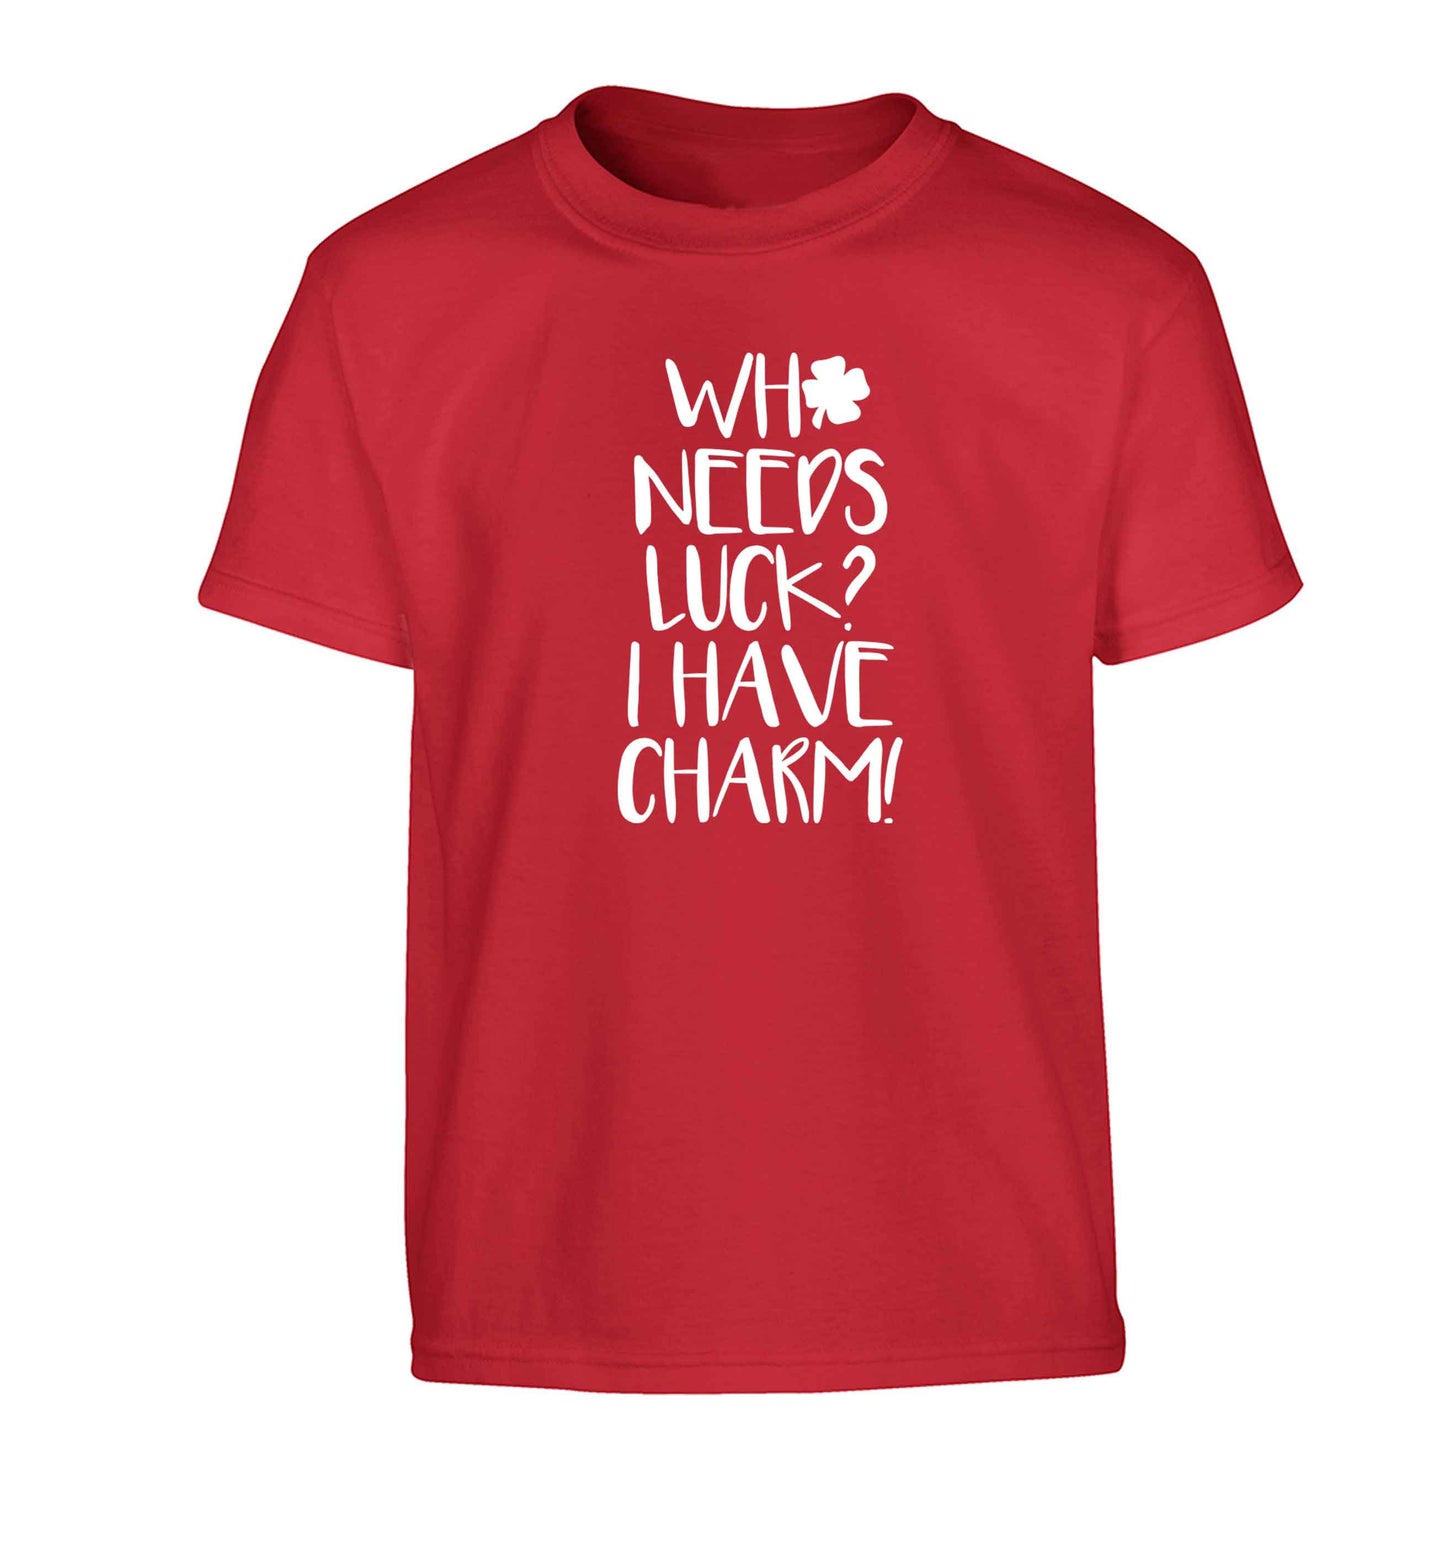 Who needs luck? I have charm! Children's red Tshirt 12-13 Years